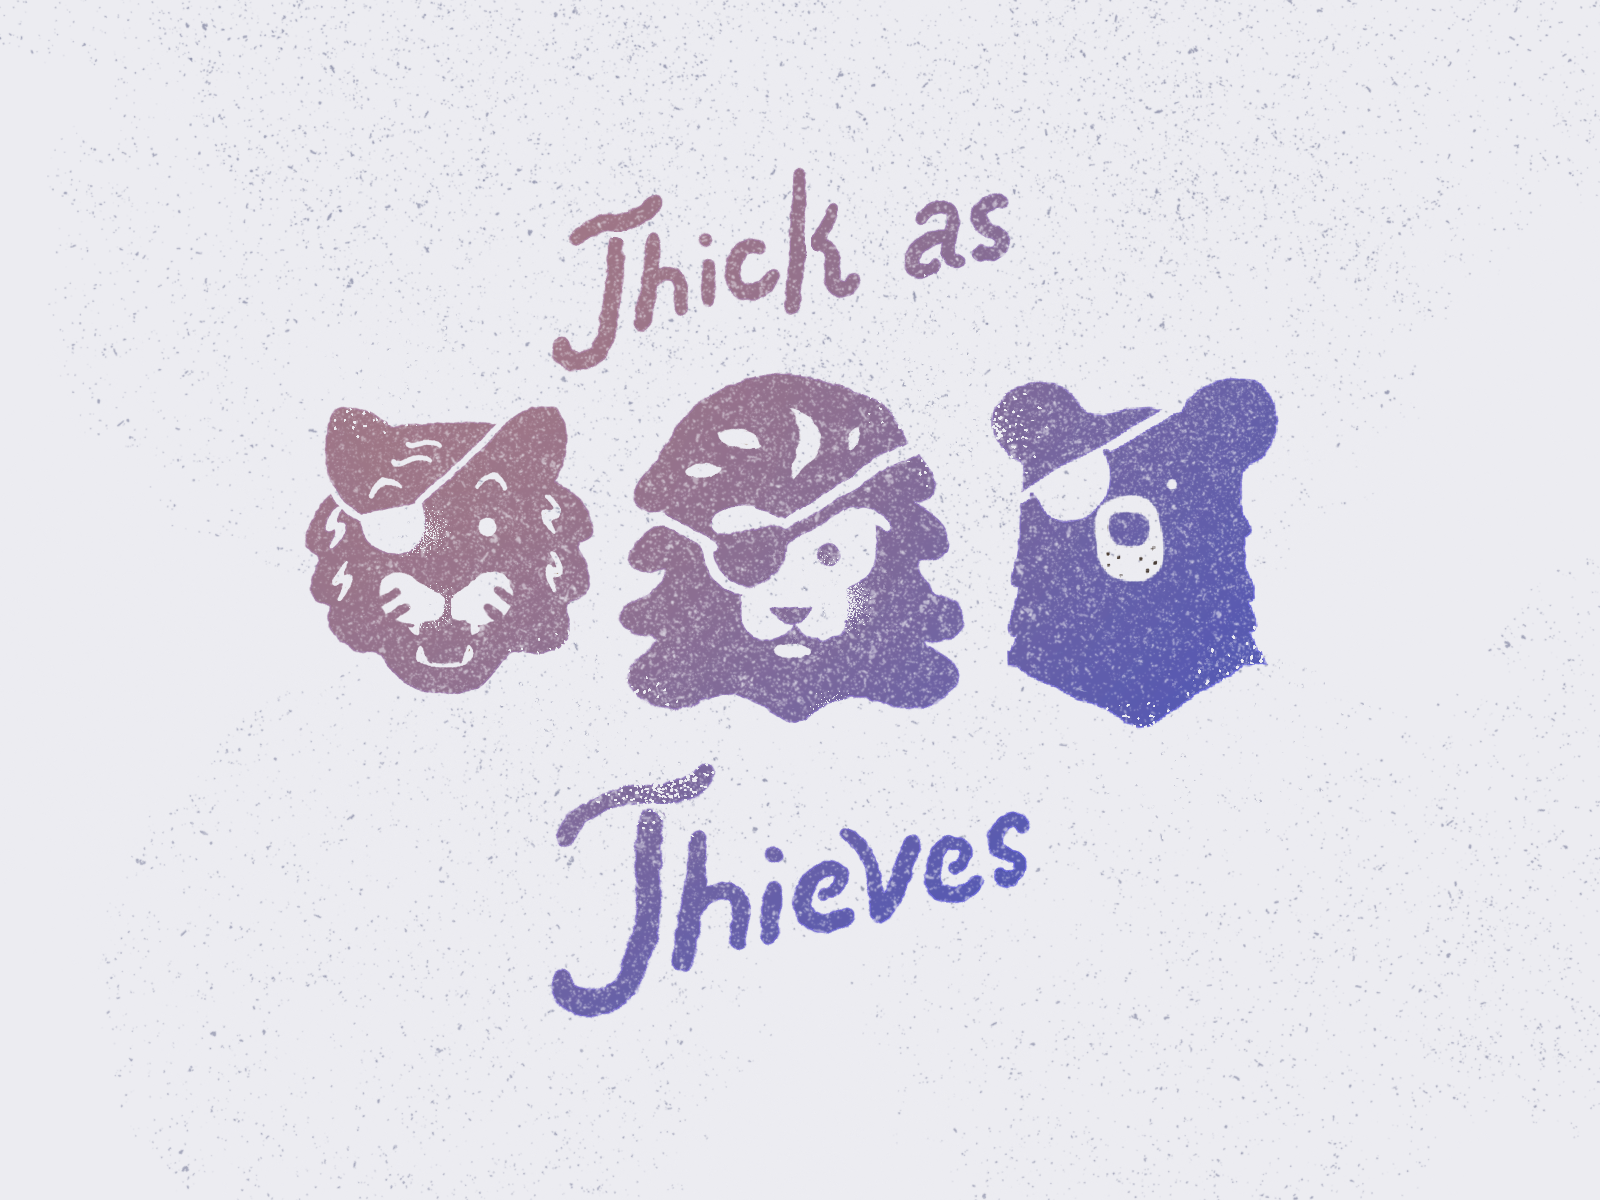 Thick As Thieves animal bear bears drawing hand drawn illustration lion lion head lions procreate thief thieves tiger tiger mascot tigers wild wild animal wilderness wildlife